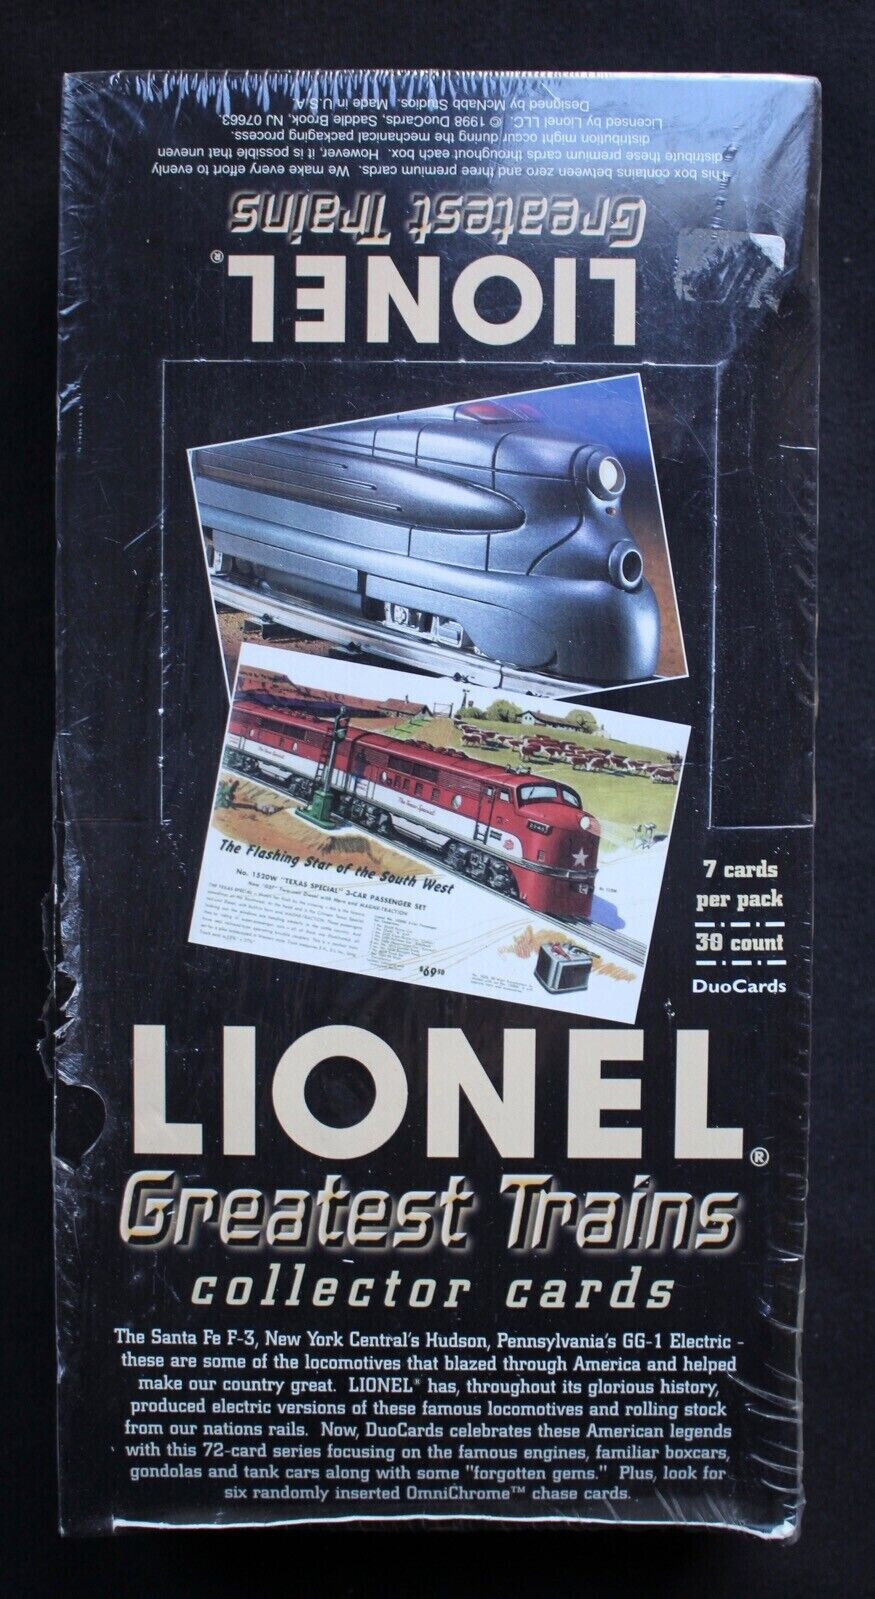 Lionel Greatest Trains Card Box 30 Packs Duocards 1998